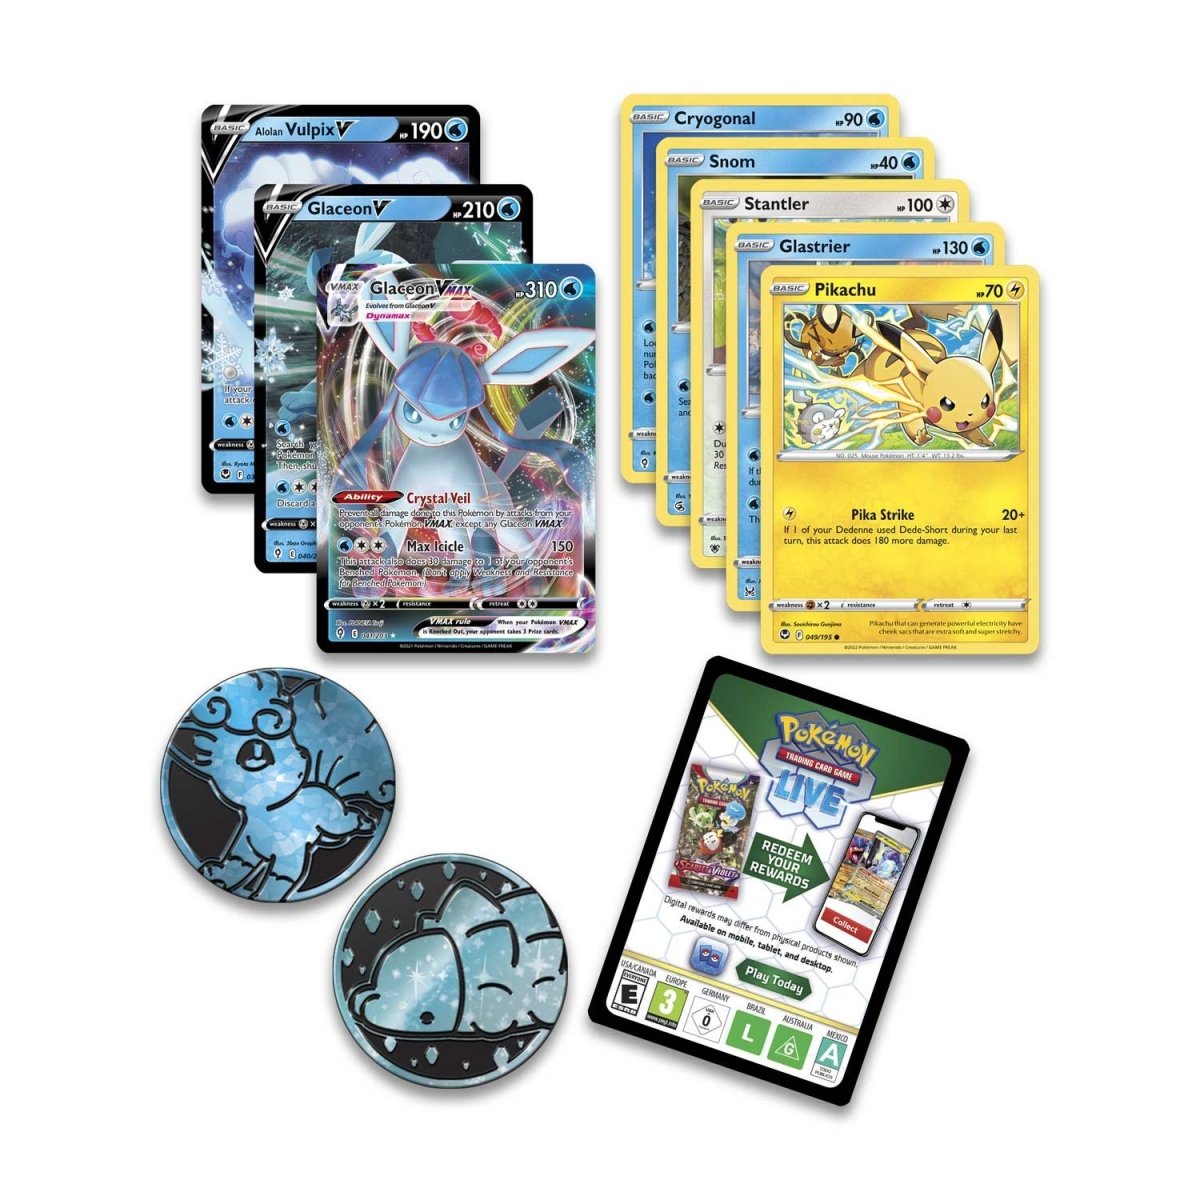 Pokemon Trading Card Game: 2023 Holiday Advent Calendar : Target